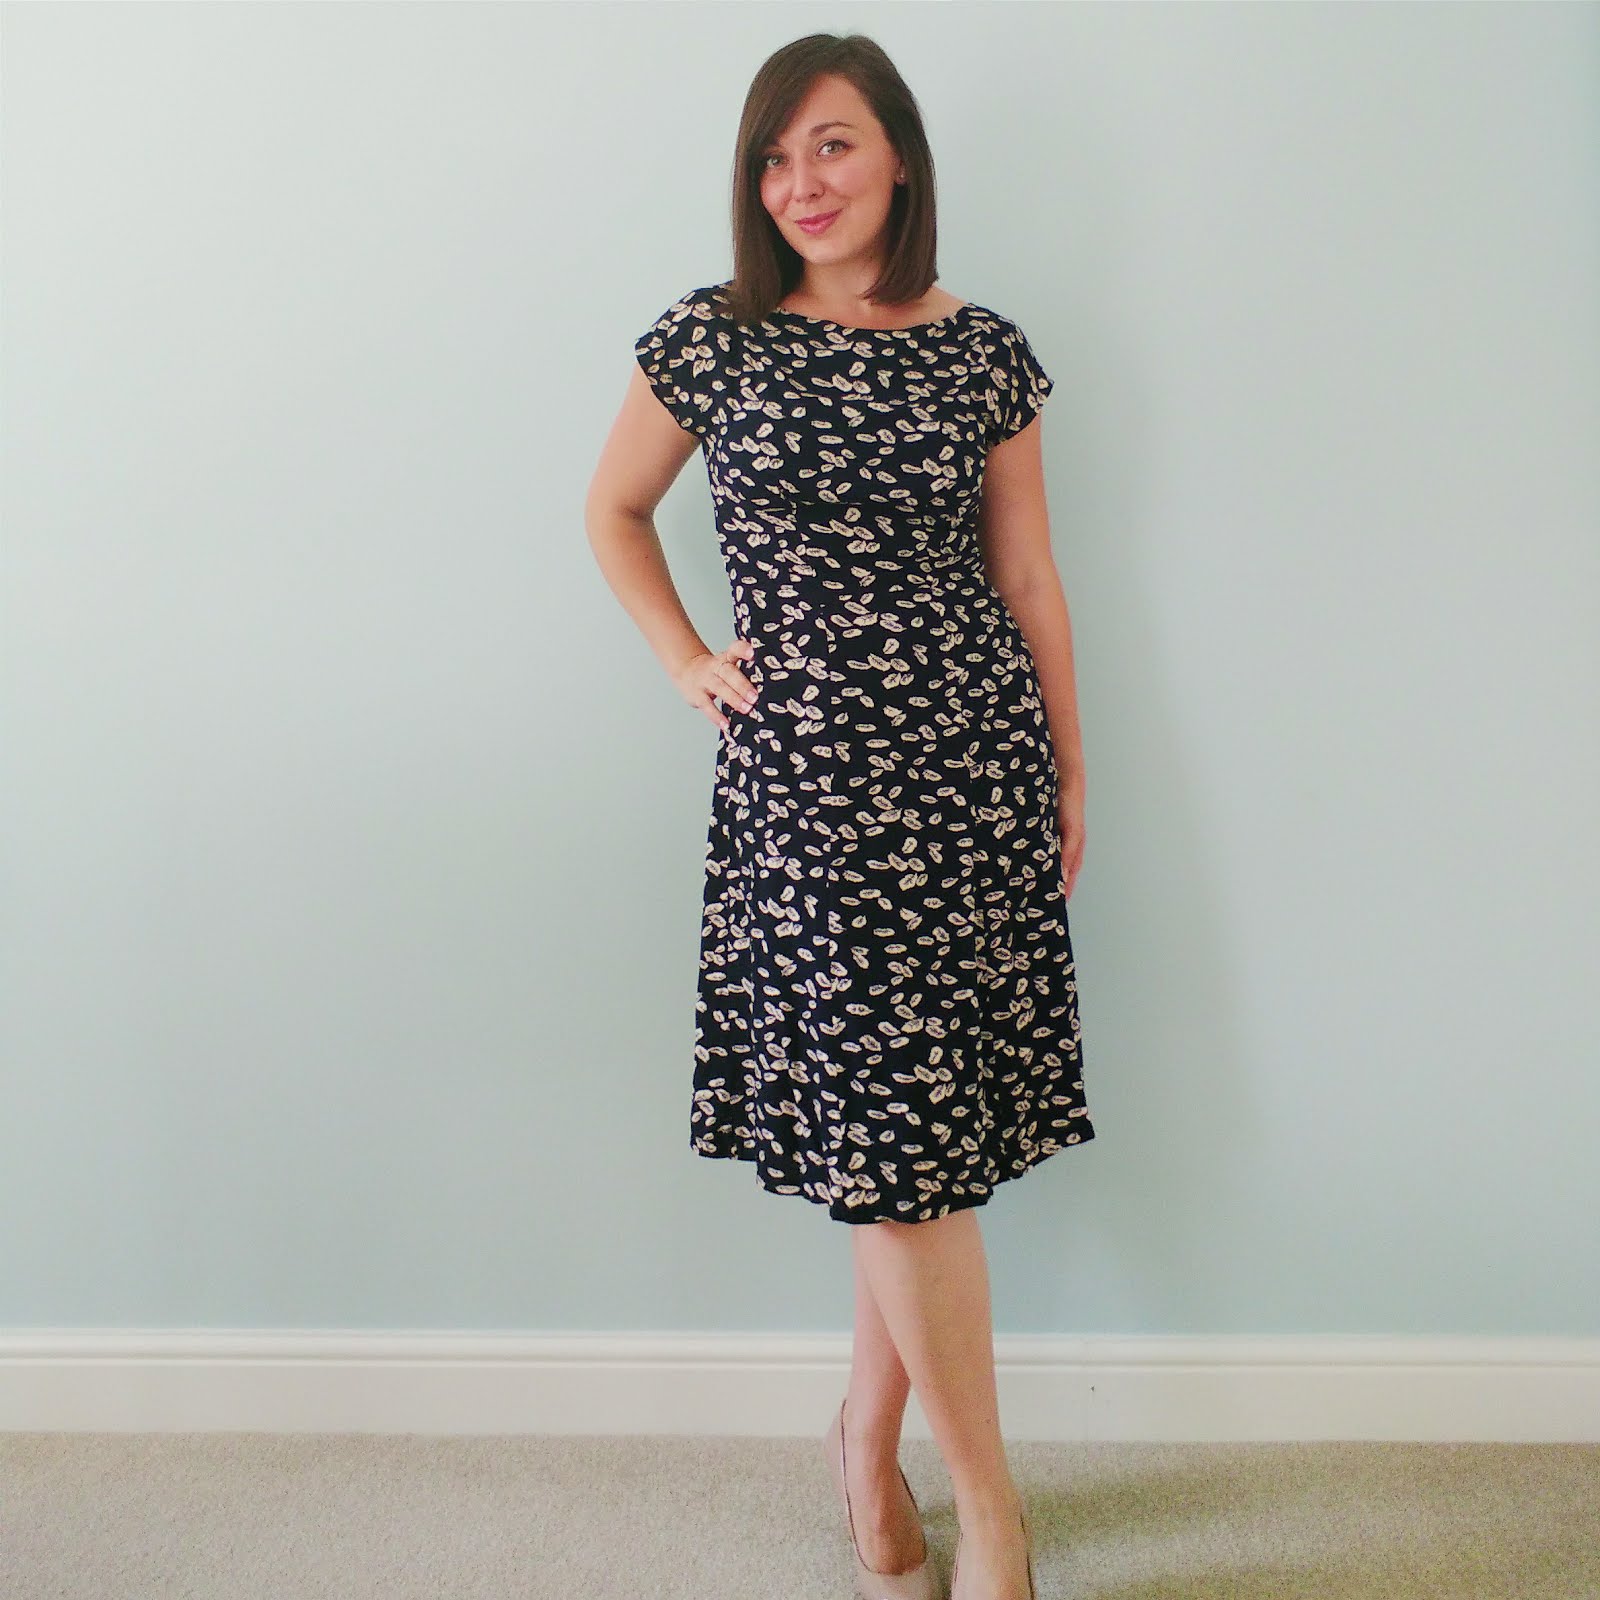 Anna Dress from By Hand London | Sewing ...